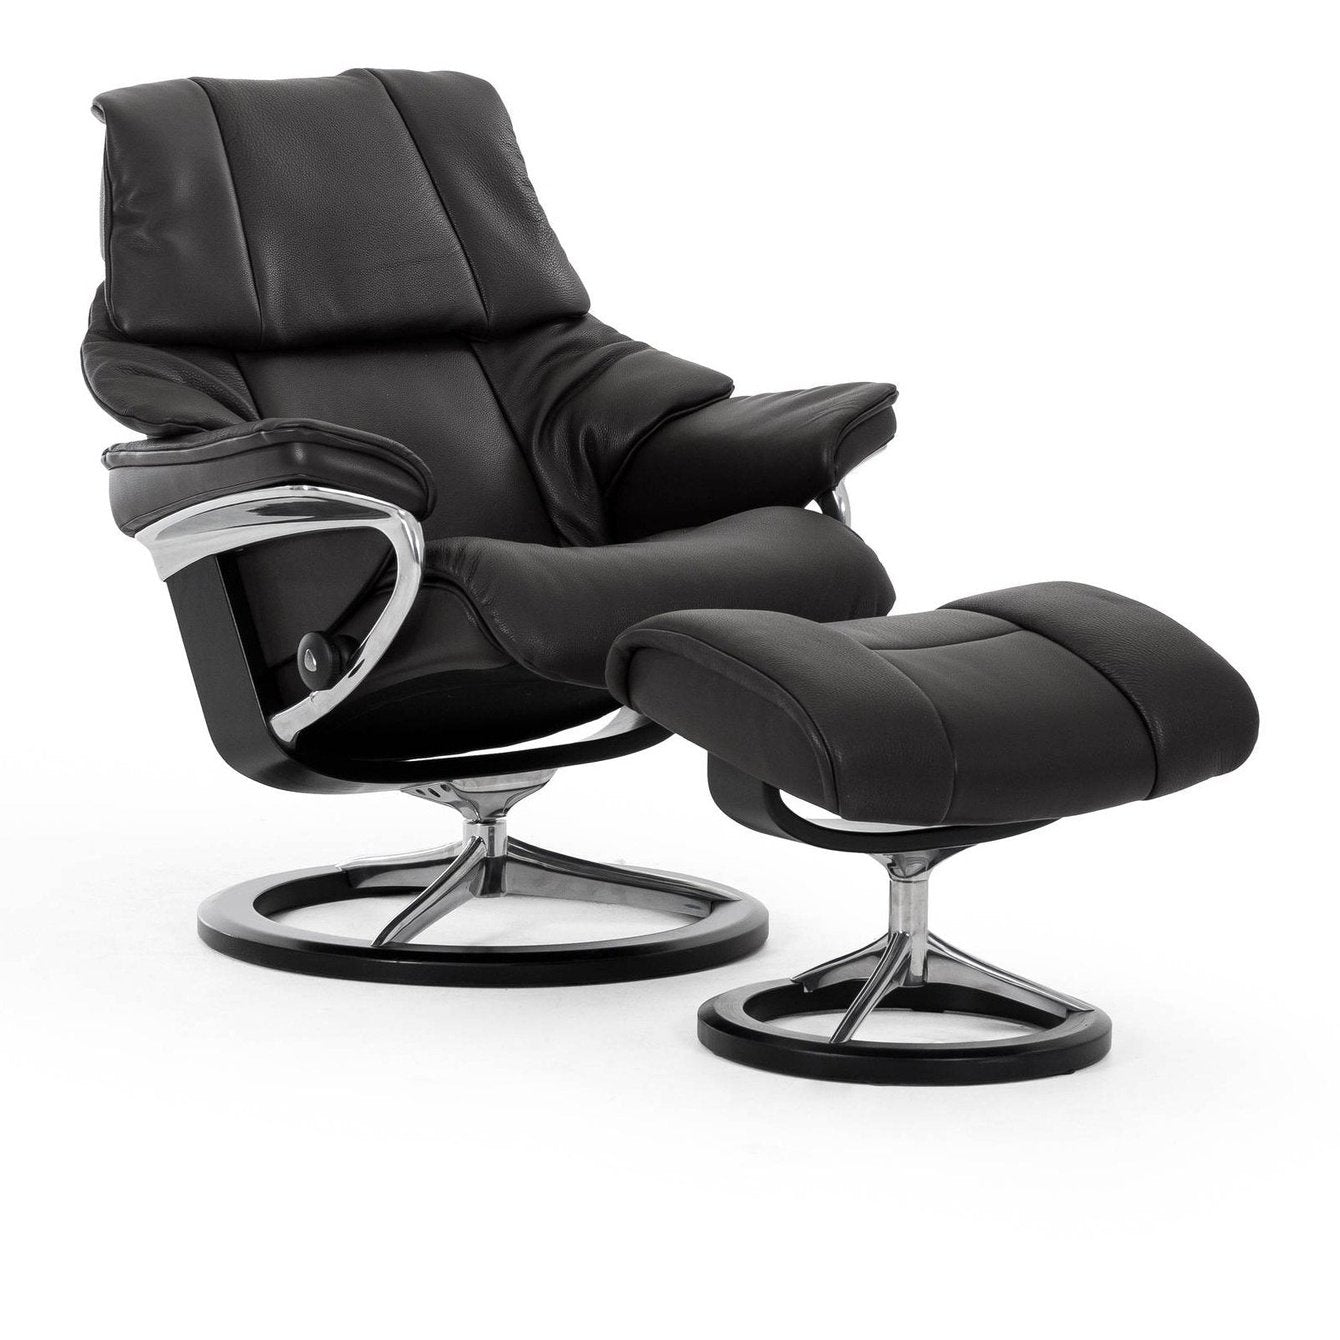 Stressless Reno Large Recliner Chair